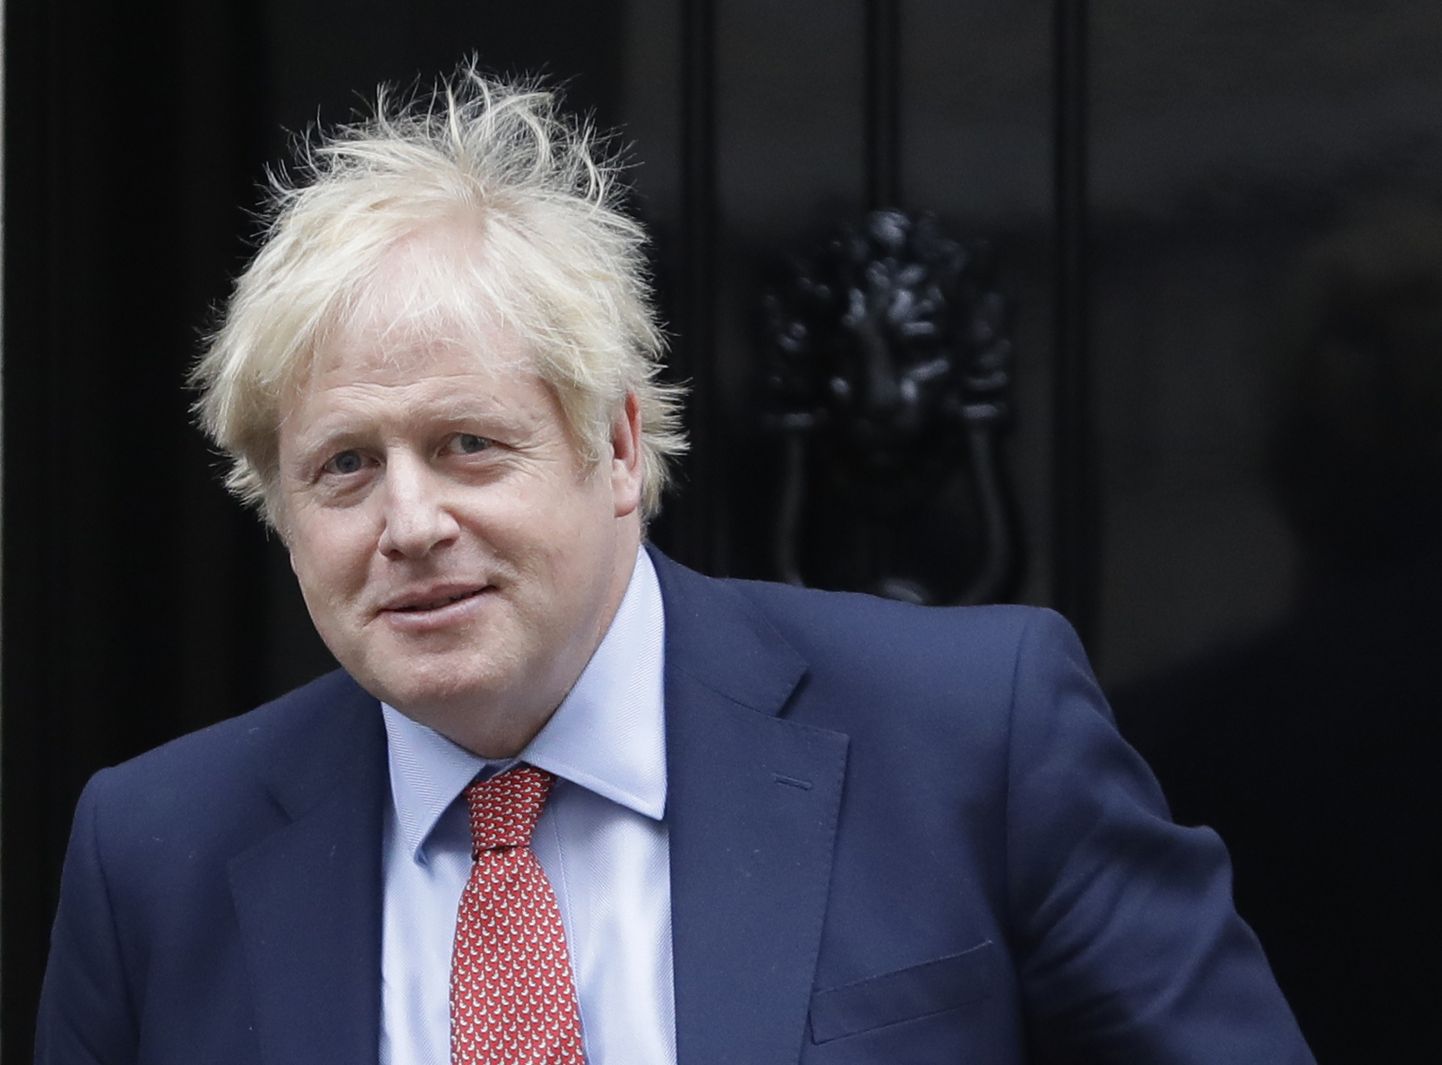 Britain's Prime Minister Boris Johnson leaves 10 Downing Street to attend the weekly session of Prime Minister's Questions in Parliament in London, Wednesday, Jan. 22, 2020. (AP Photo/Kirsty Wigglesworth)